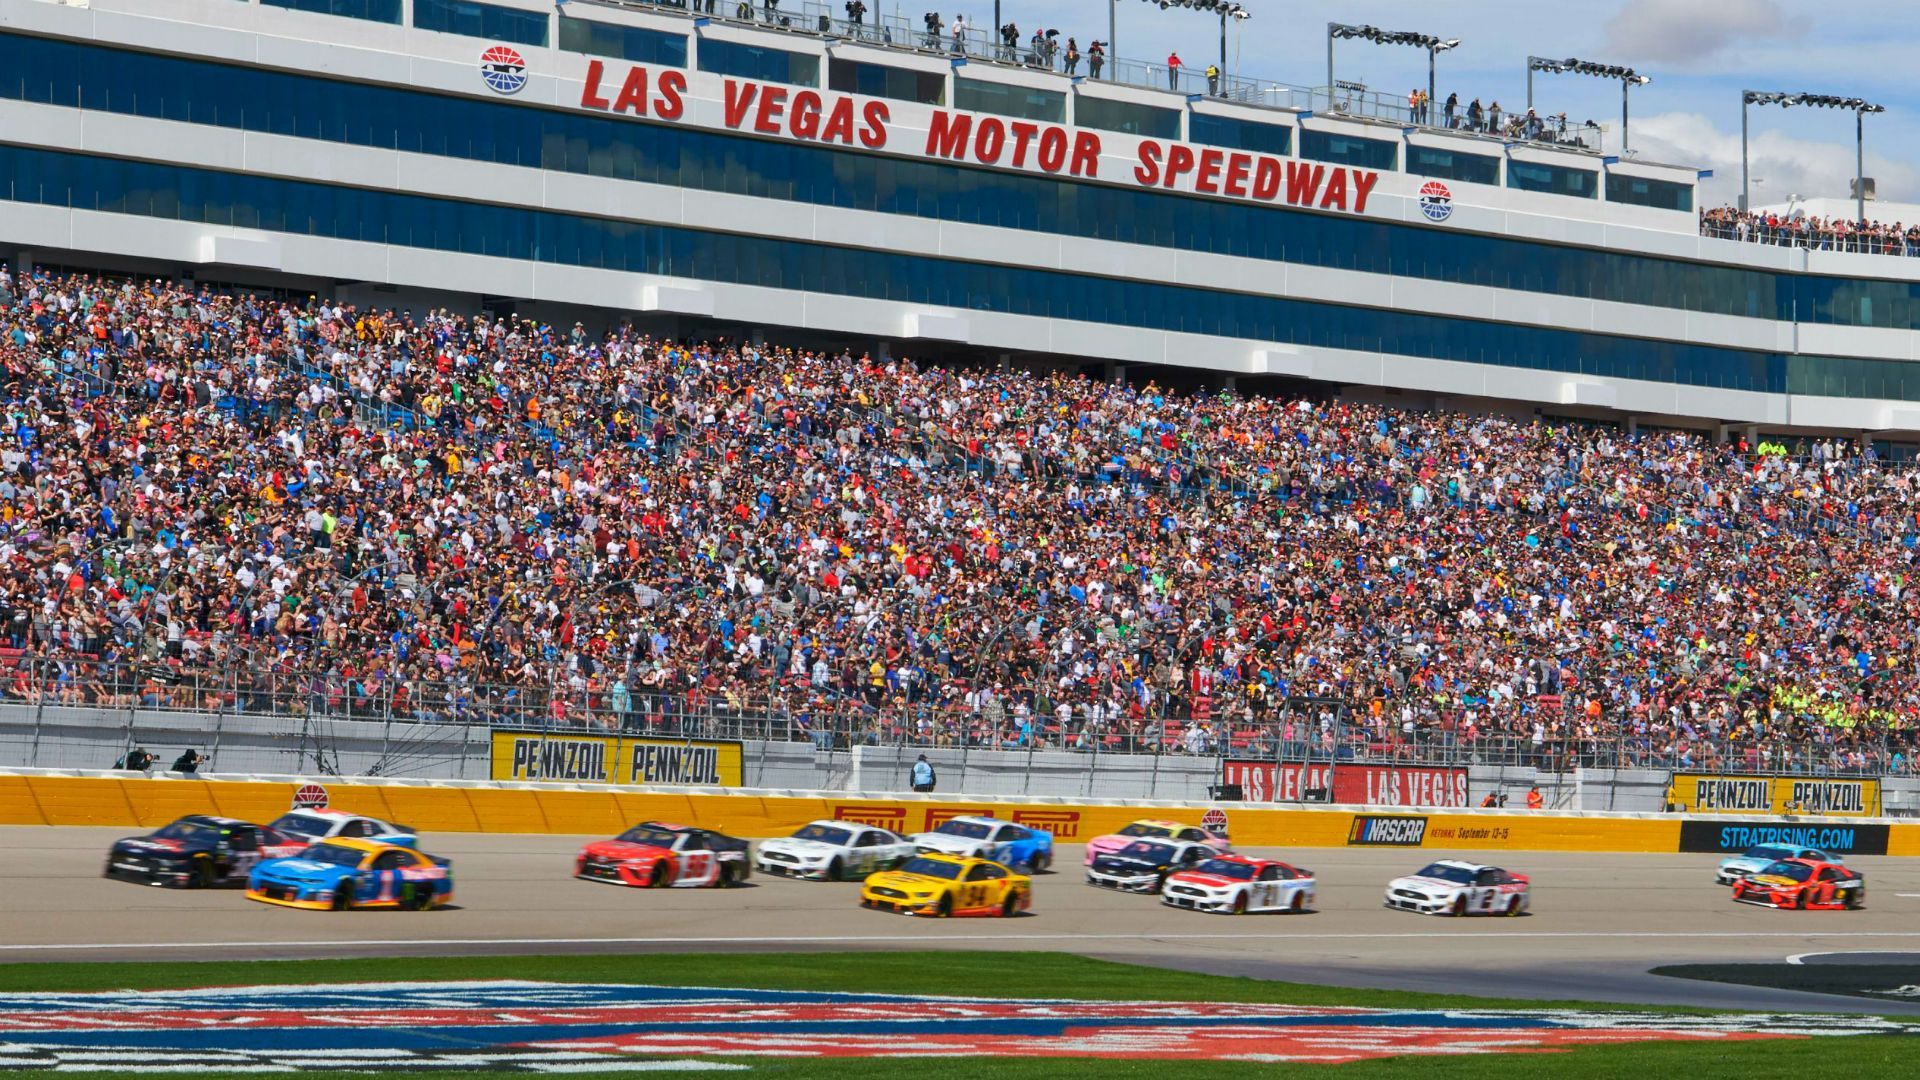 NASCAR live stream: How to watch Las Vegas race for free without cable